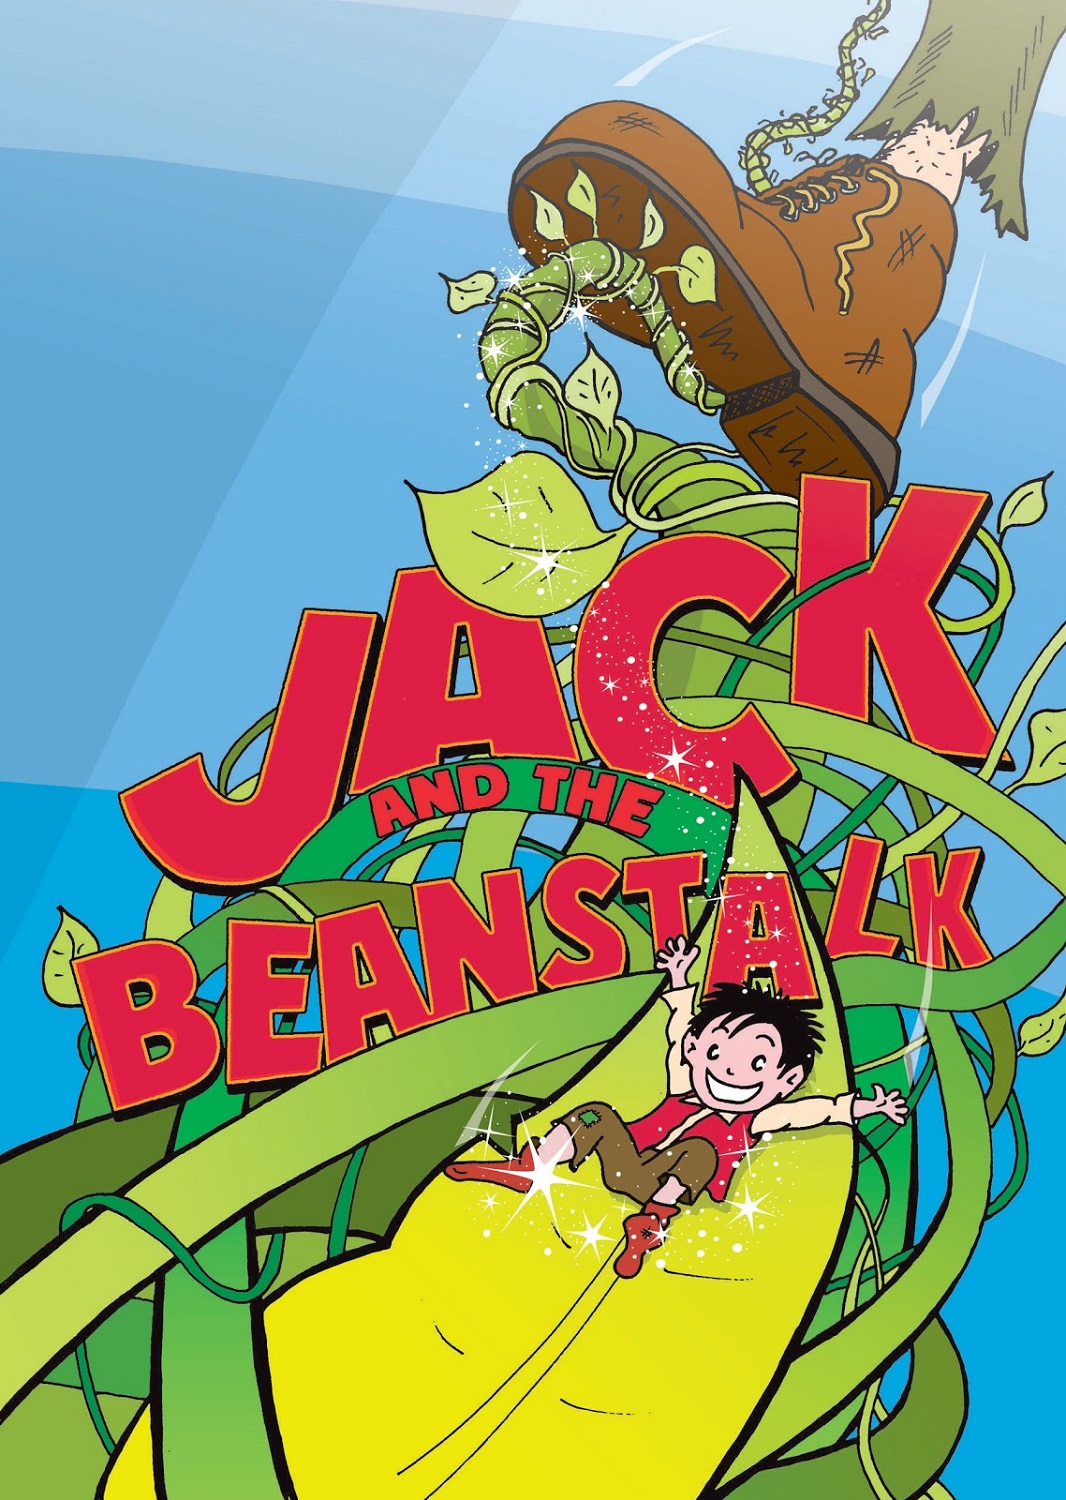 jack-and-the-beanstalk-images-children